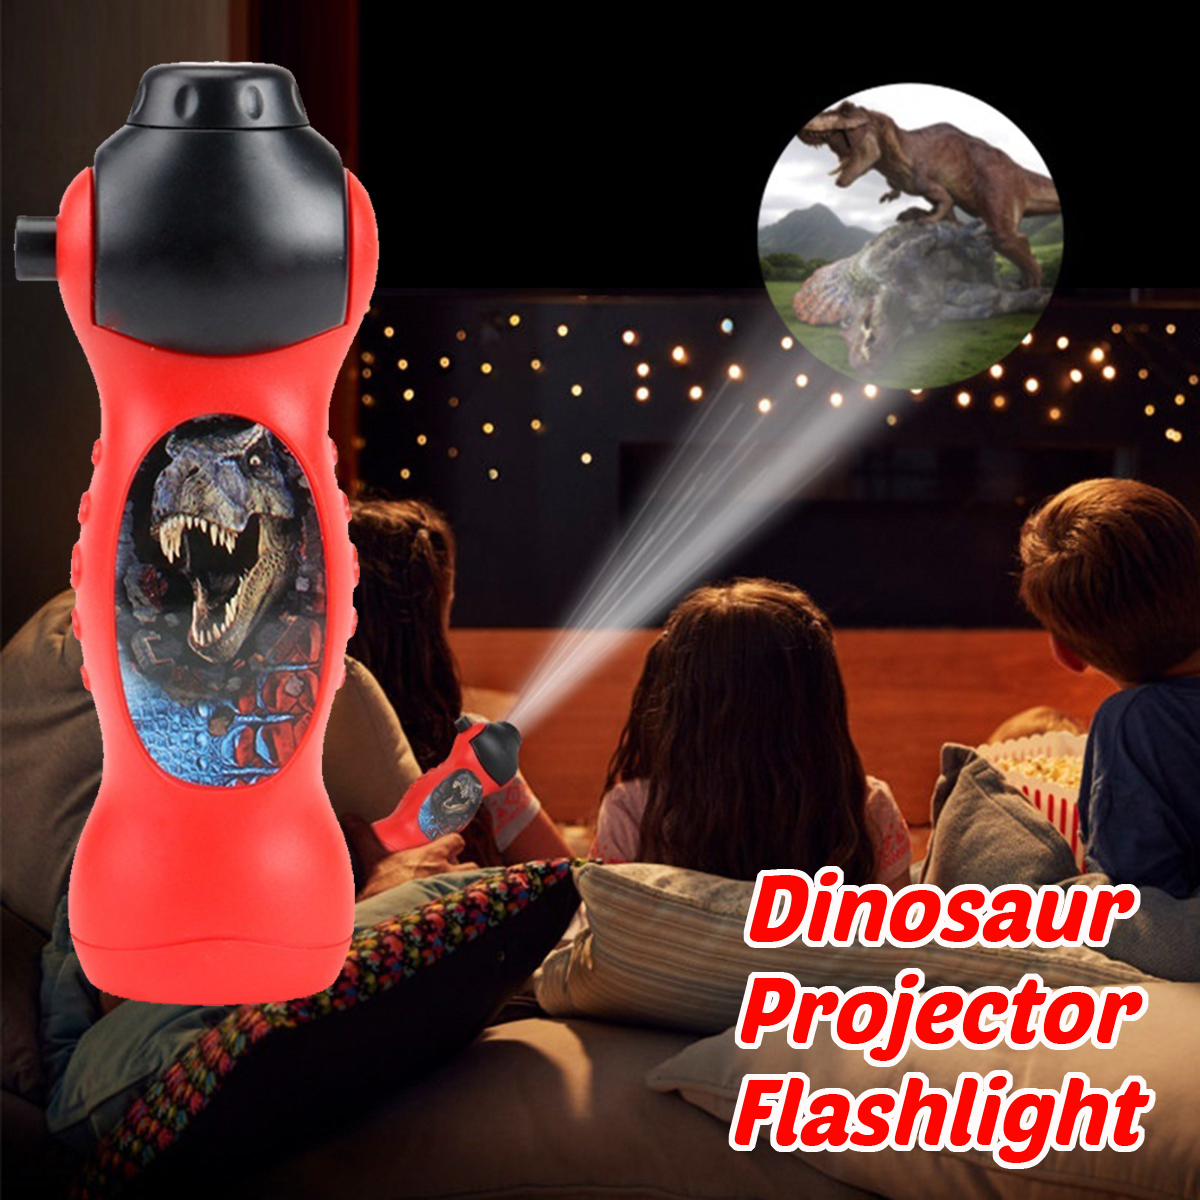 24-Dinosaur-Patterns-Flashlight-Projector-Lamp-Educational-Puzzle-Toy-Kids-Children-Christmas-Gift-1826552-2